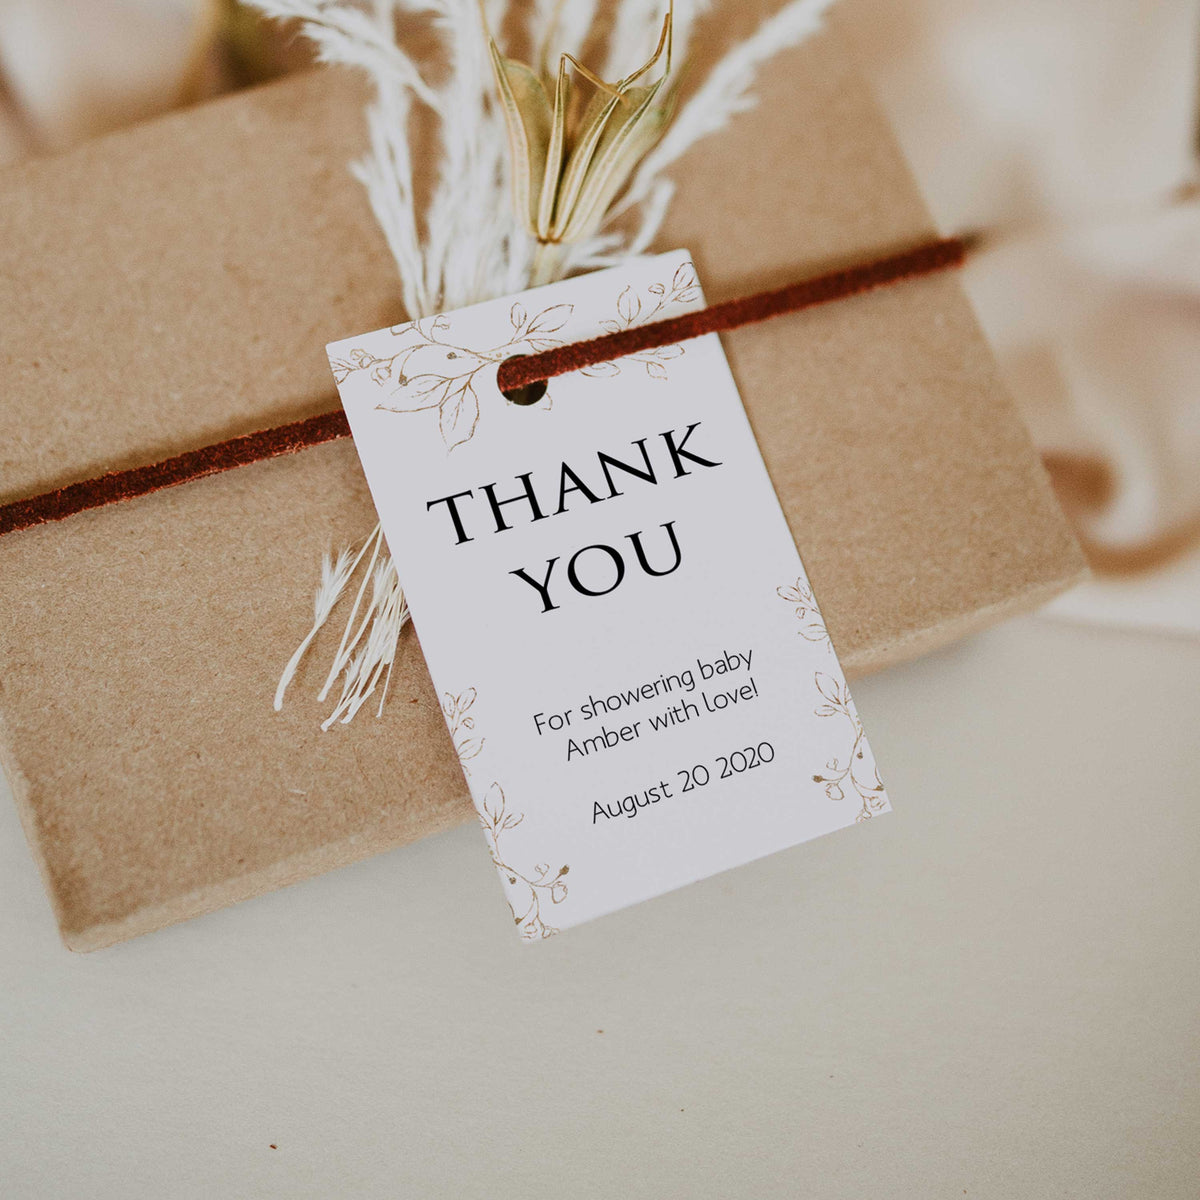 Thank you tags, Printable baby shower games, gold leaf baby games, baby shower games, fun baby shower ideas, top baby shower ideas, gold leaf baby shower, baby shower games, fun gold leaf baby shower ideas